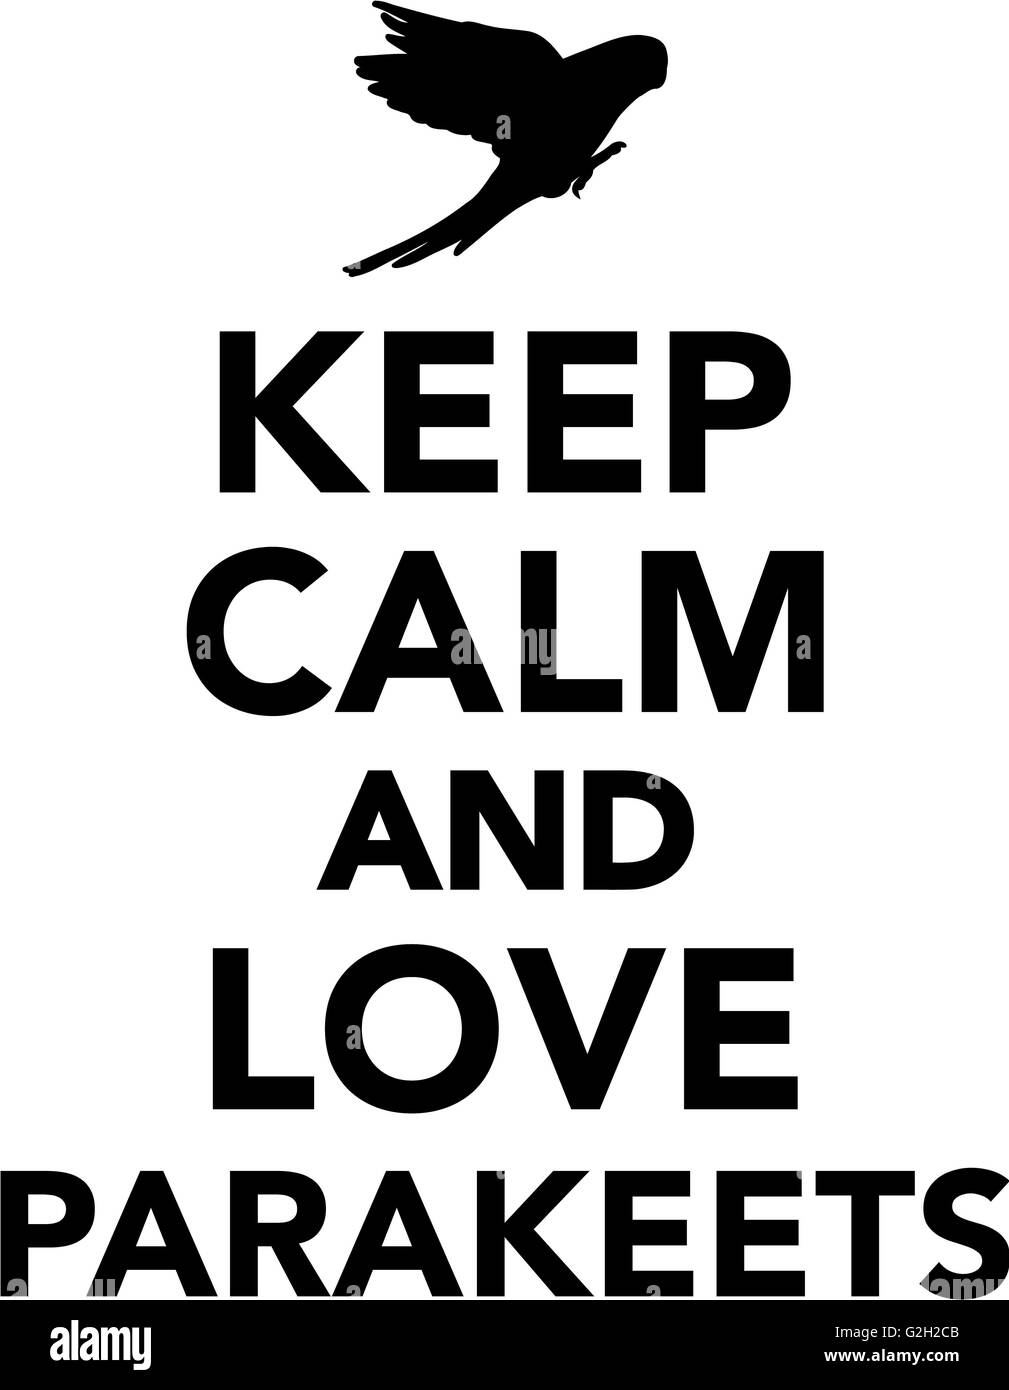 Keep calm and love parakeets Stock Photo